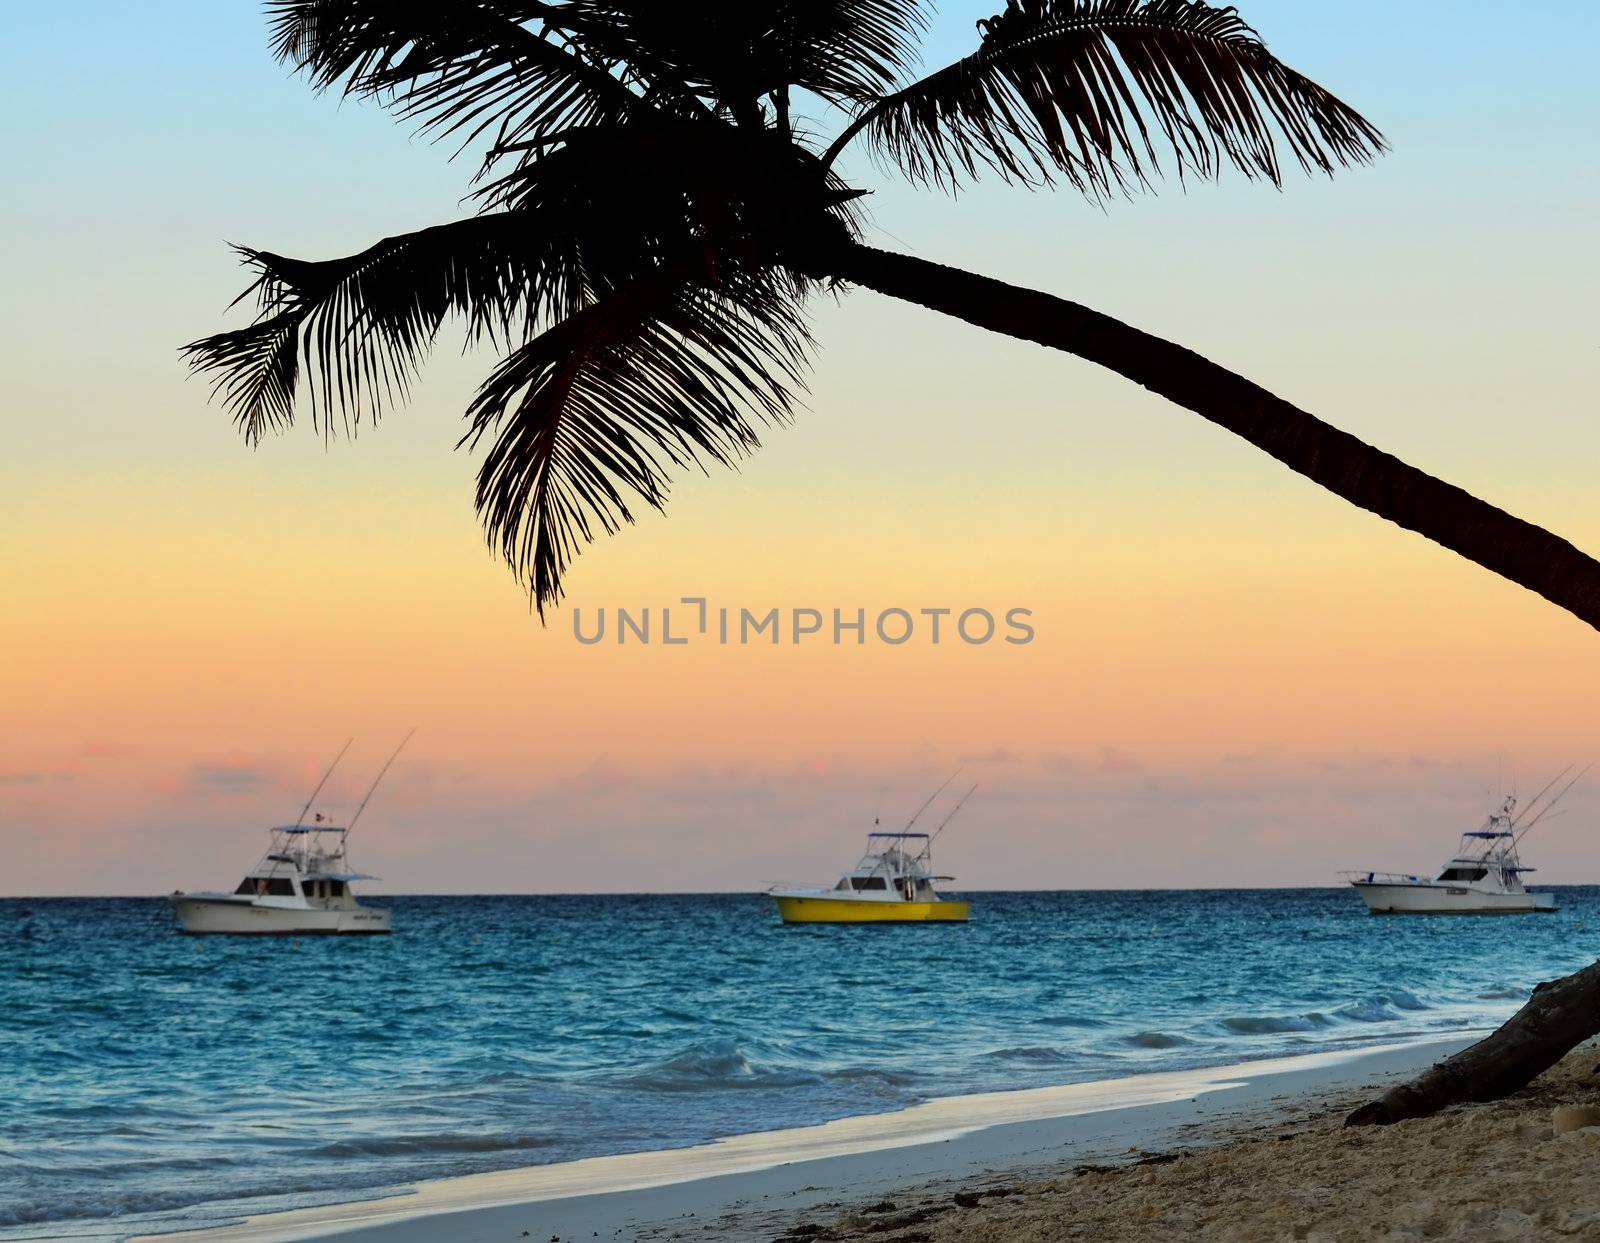 Palm tree and fishing boats at tropical beach at sunset. Focus on palm tree.